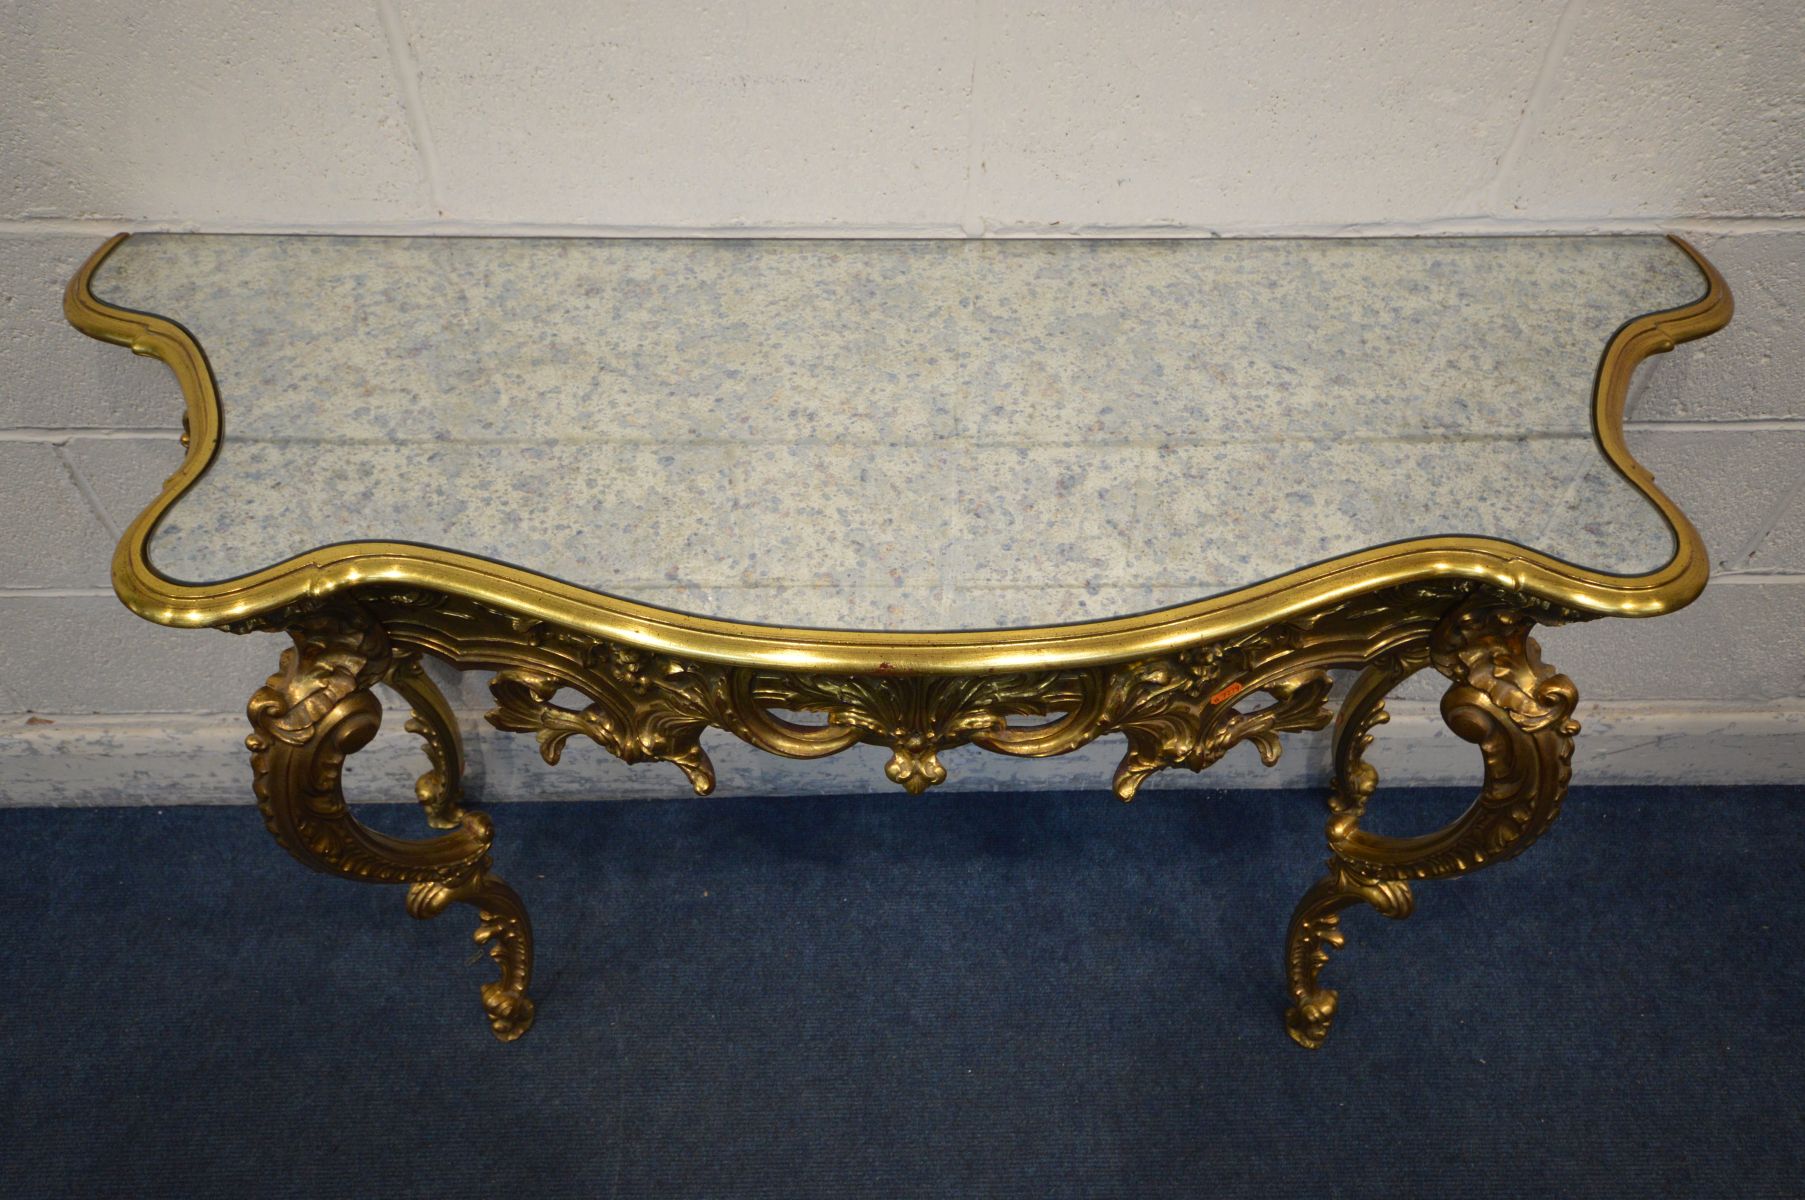 A LATE 20TH CENTURY GILTWOOD FRENCH STYLE HALL TABLE, with a decorated mirror top on four legs, - Image 2 of 4